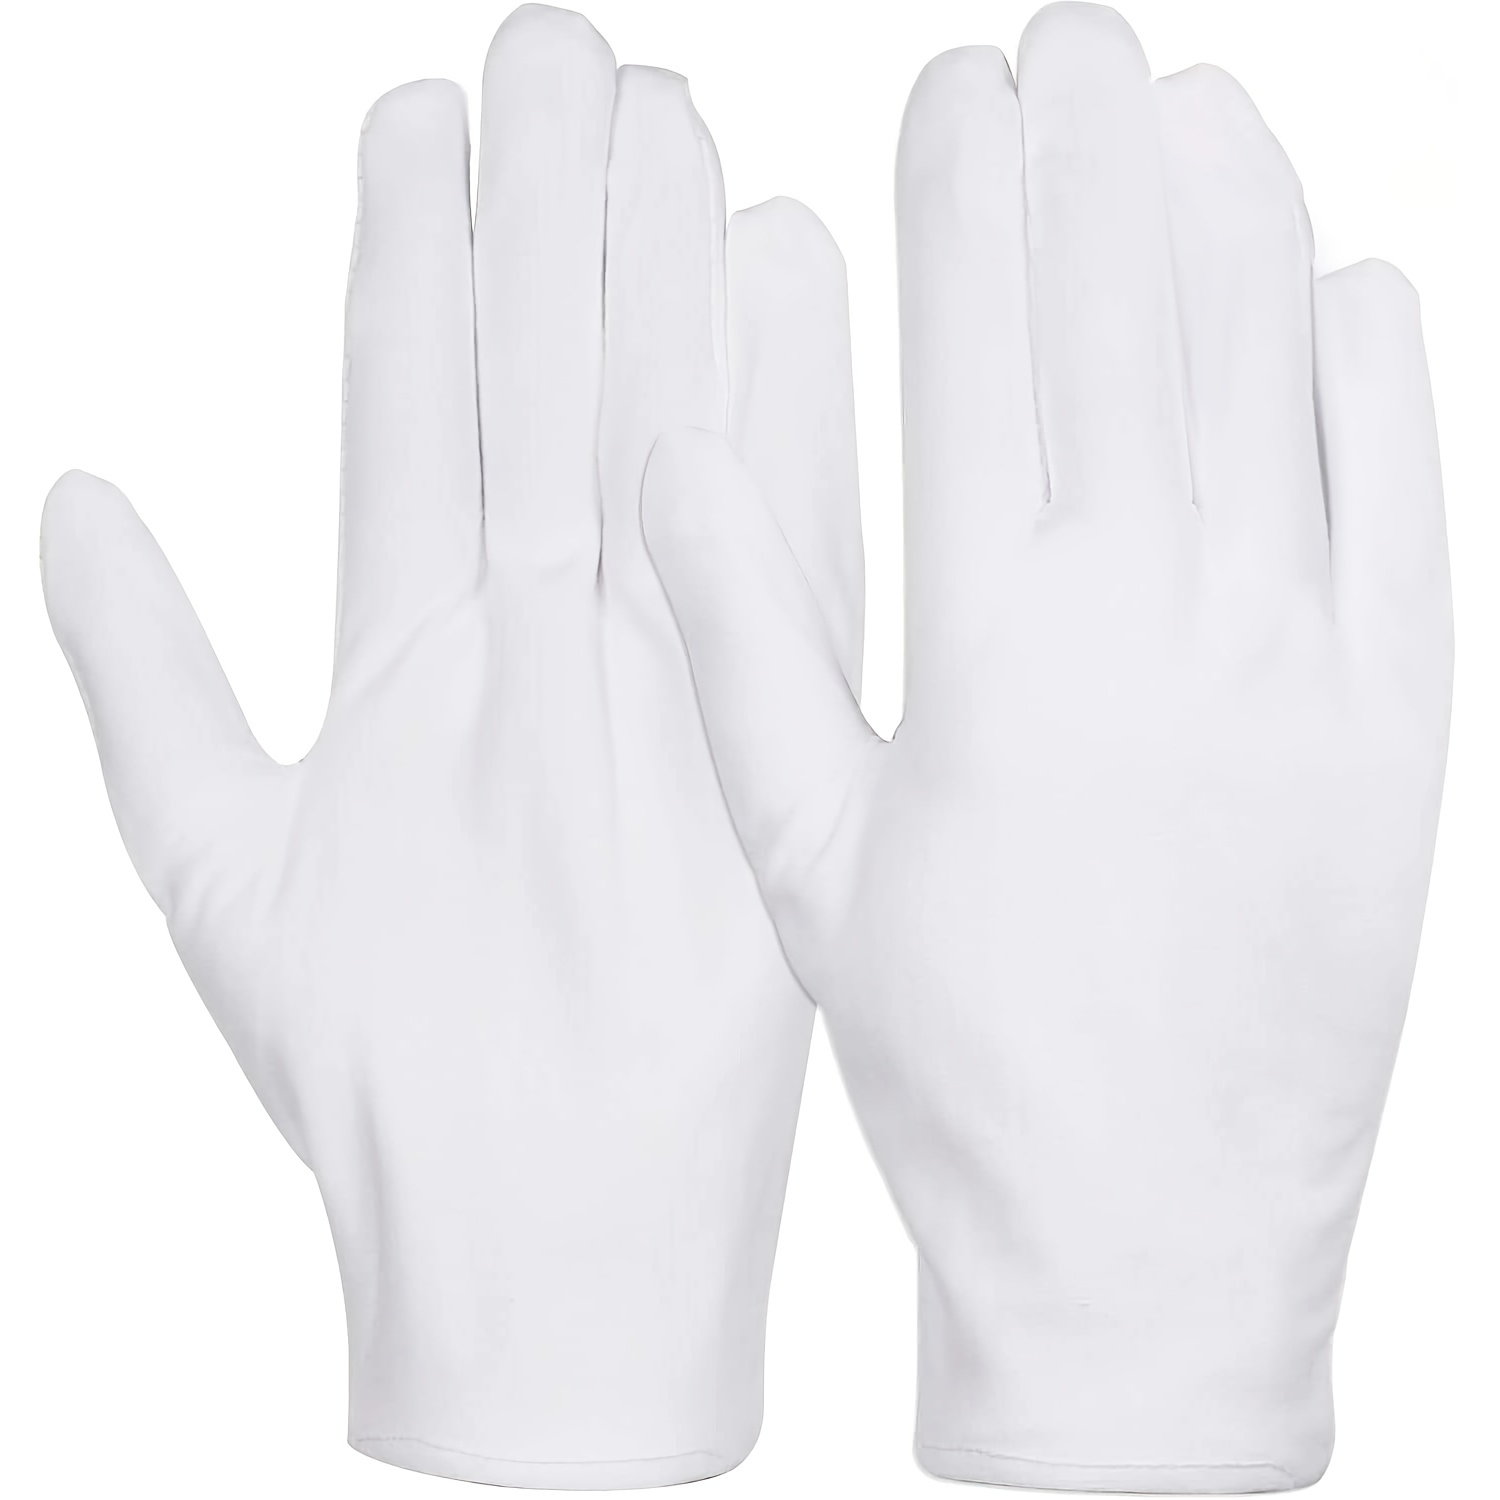 6 Pairs White Cotton Gloves for Women - Dry Hands, Eczema, Serving & More